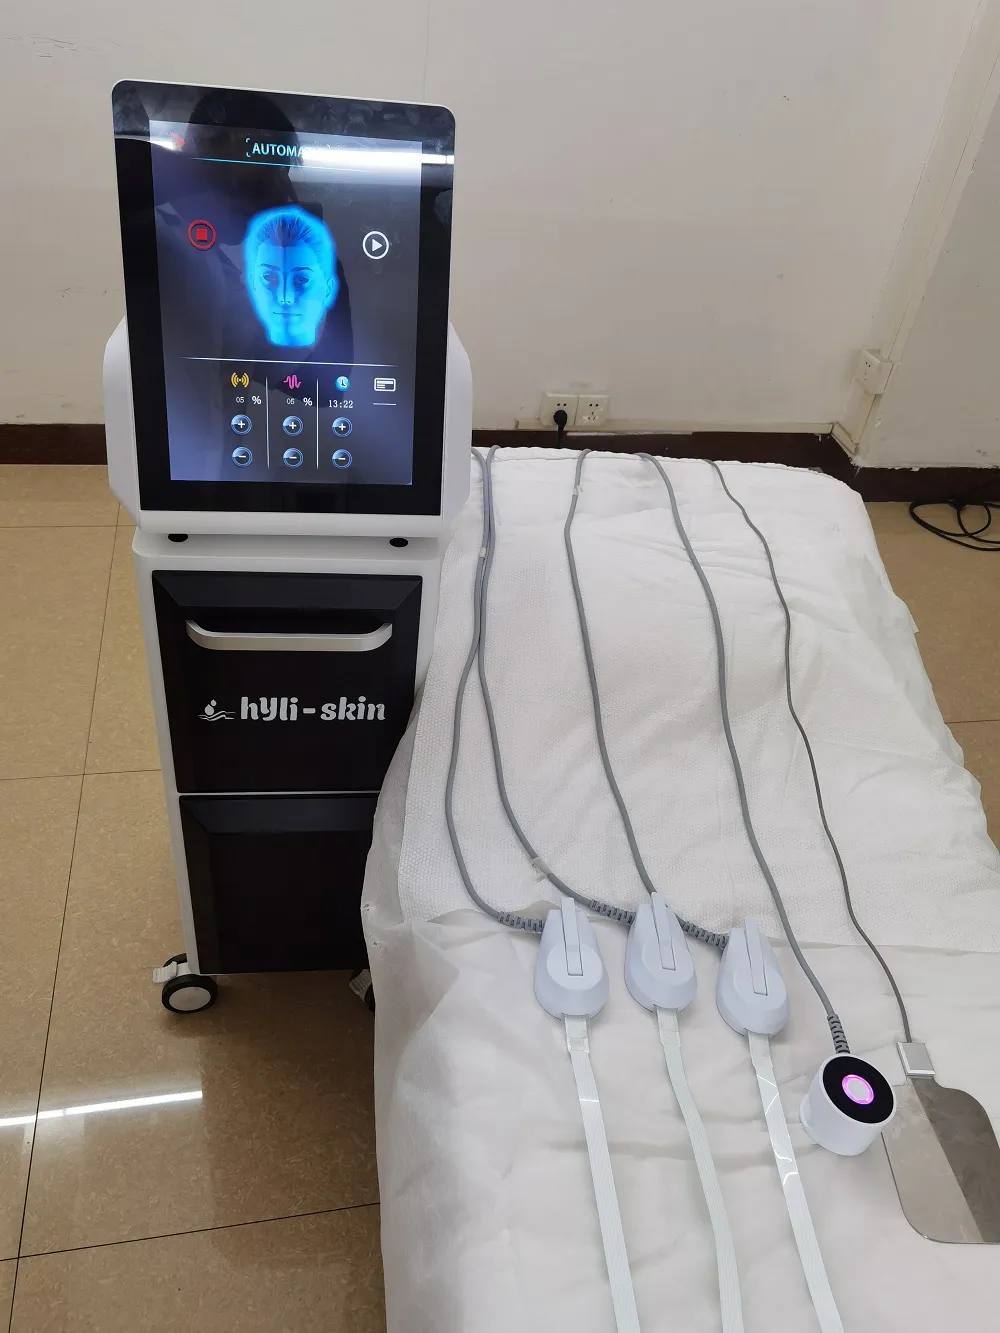 Electromagnetic Muscle Stimulation Facial Care PEface Ems Rf Machine Skin Tightening Face Neck Lifting Wrinkle Removal Device Ems face rf skin lift machine peface wrinkle removal device - Honkay ems face massager,ems face lift device,ems face machine,ems face lift machine,ems face